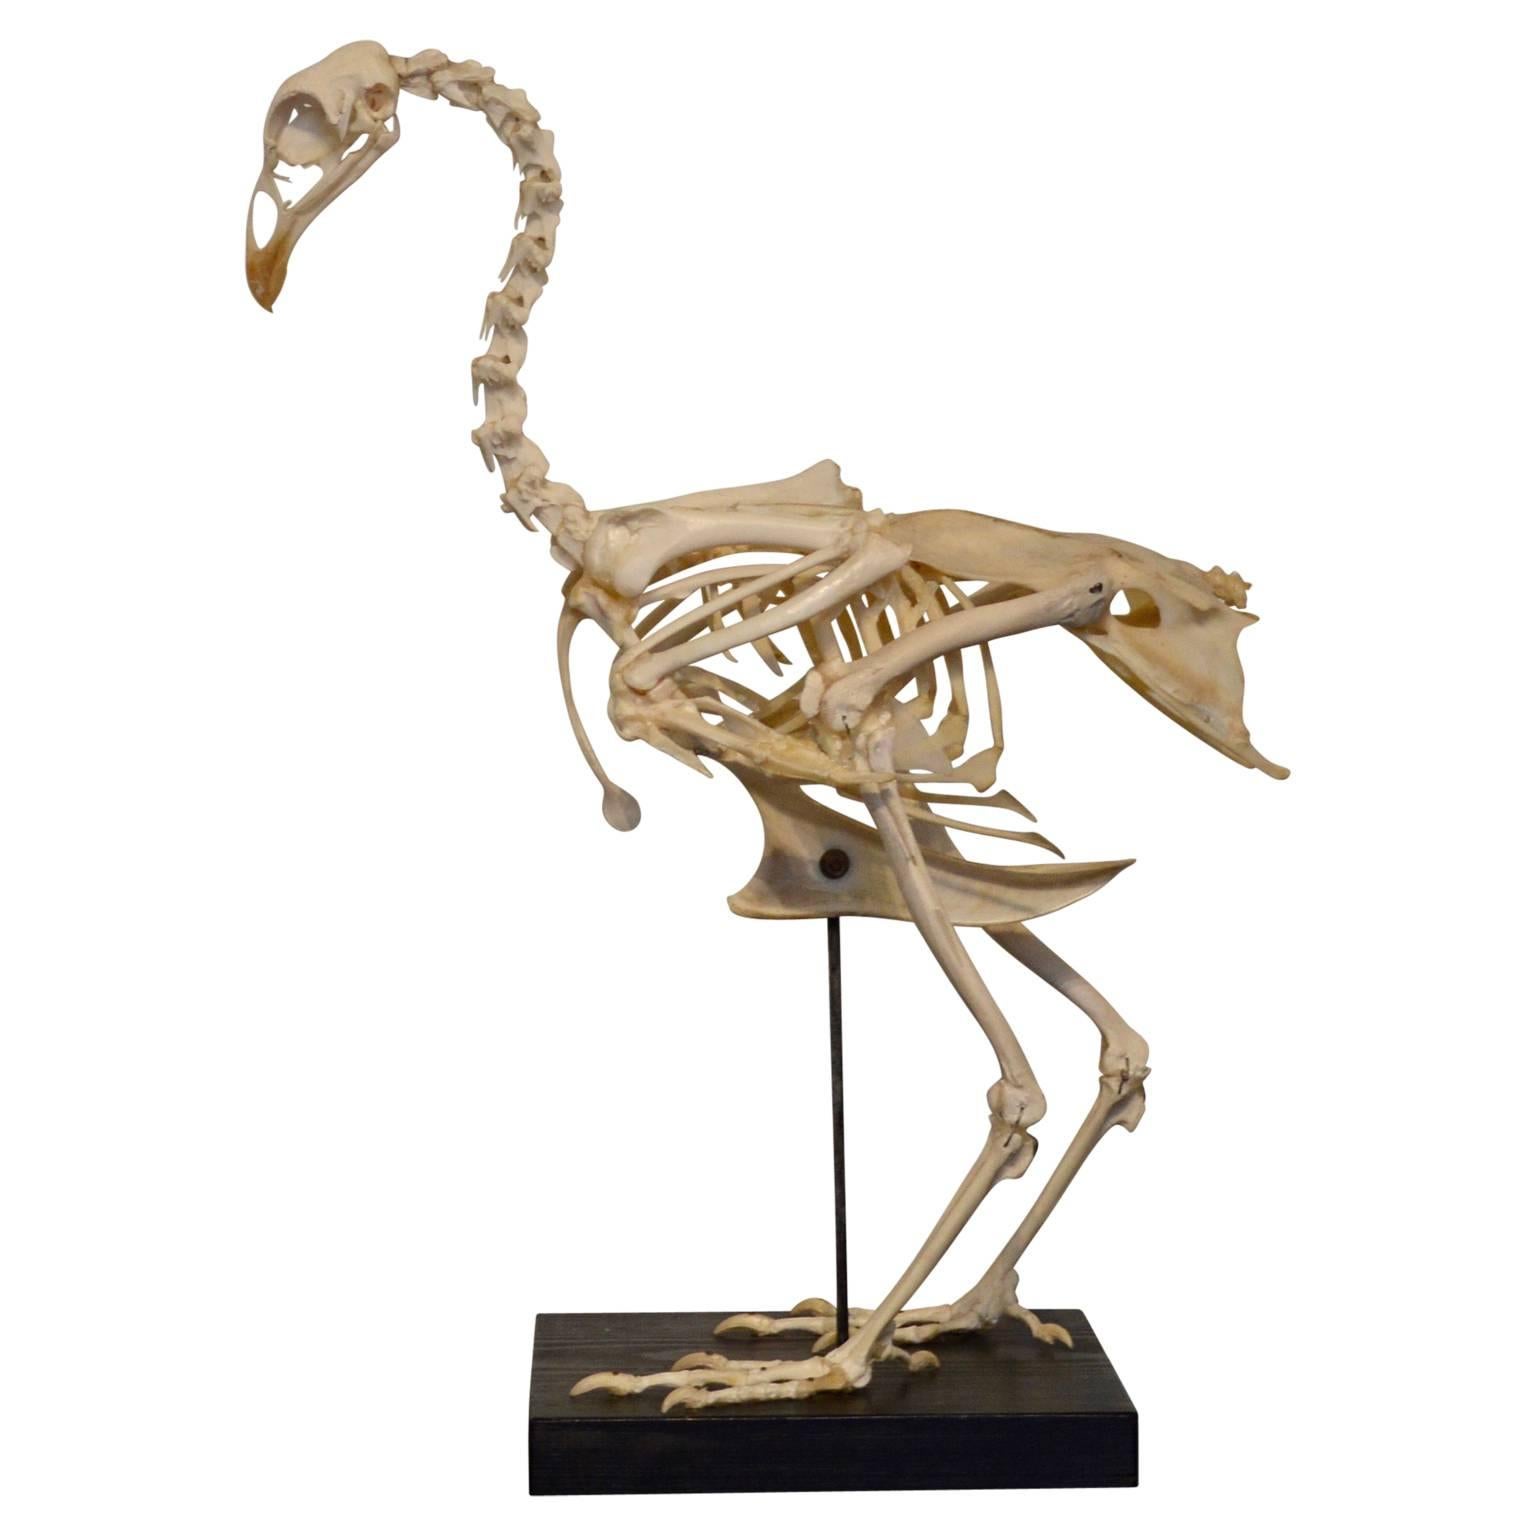 An anatomical rooster skeleton used for class. Mounted on a wooden plate.